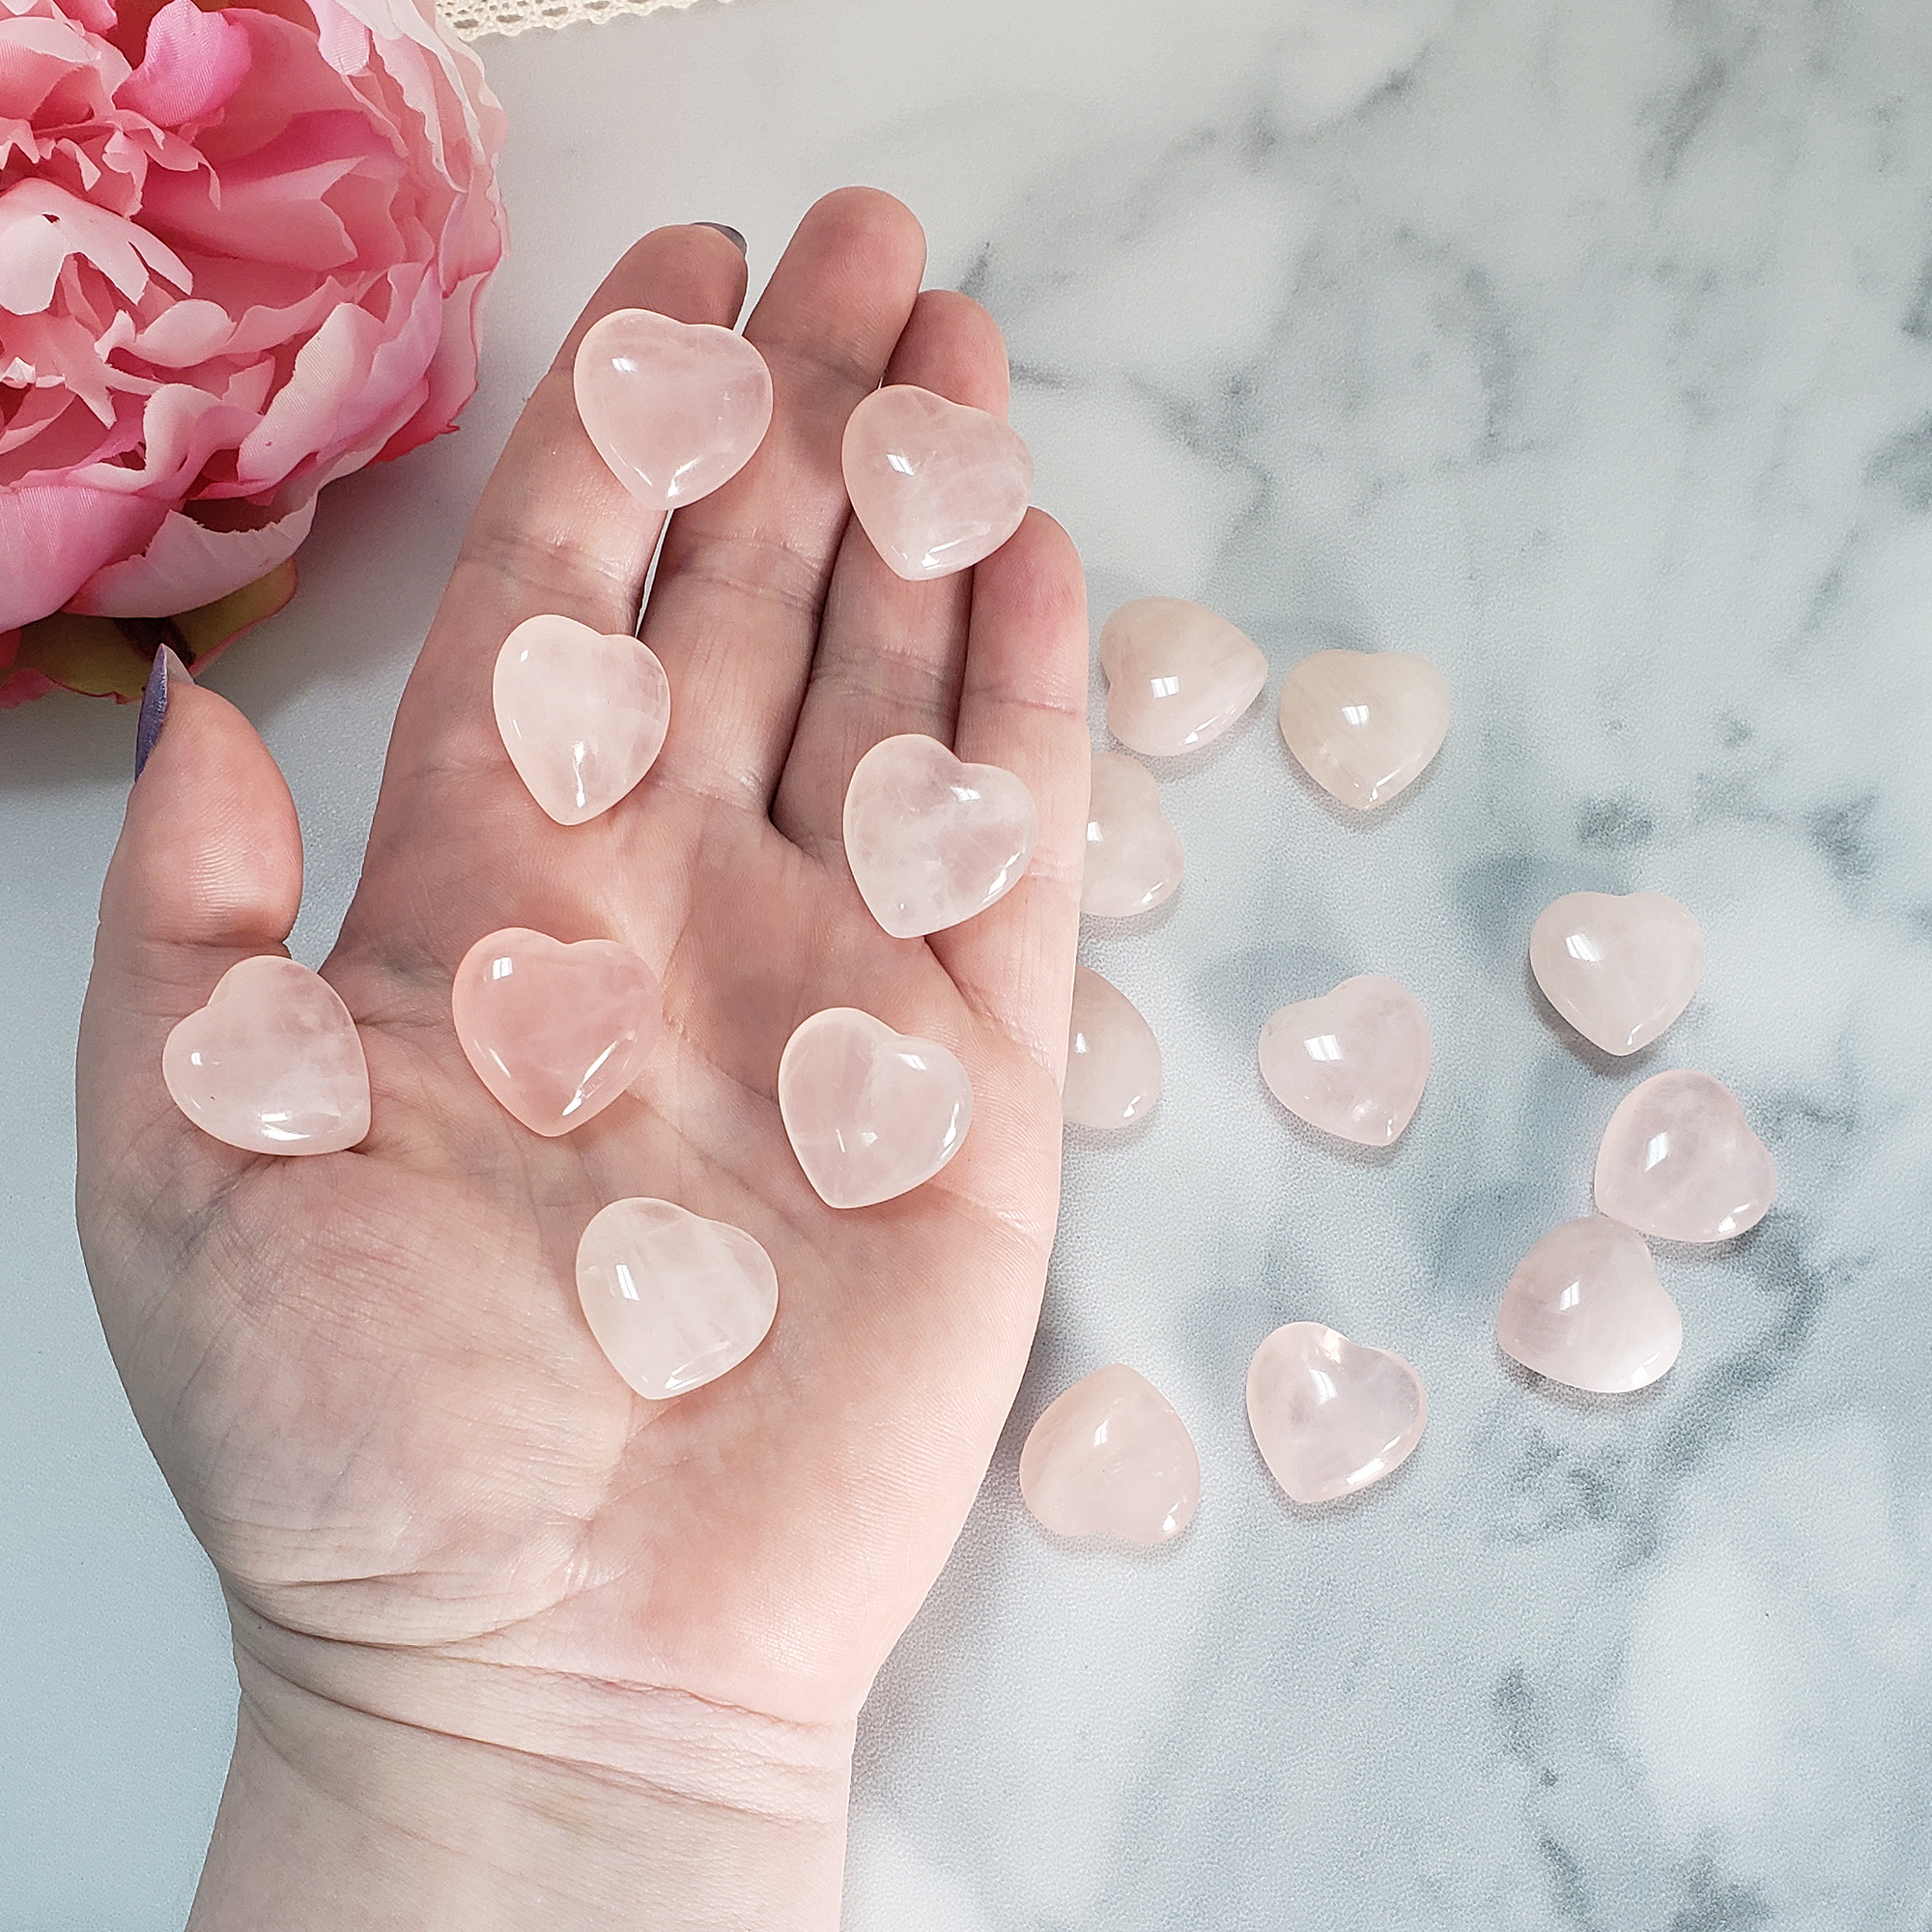 Rose Quartz Crystal Natural Gemstone Heart Mini Carving - Rose Quartz Crystal Heart Shaped Carvings in Hand and on Tile